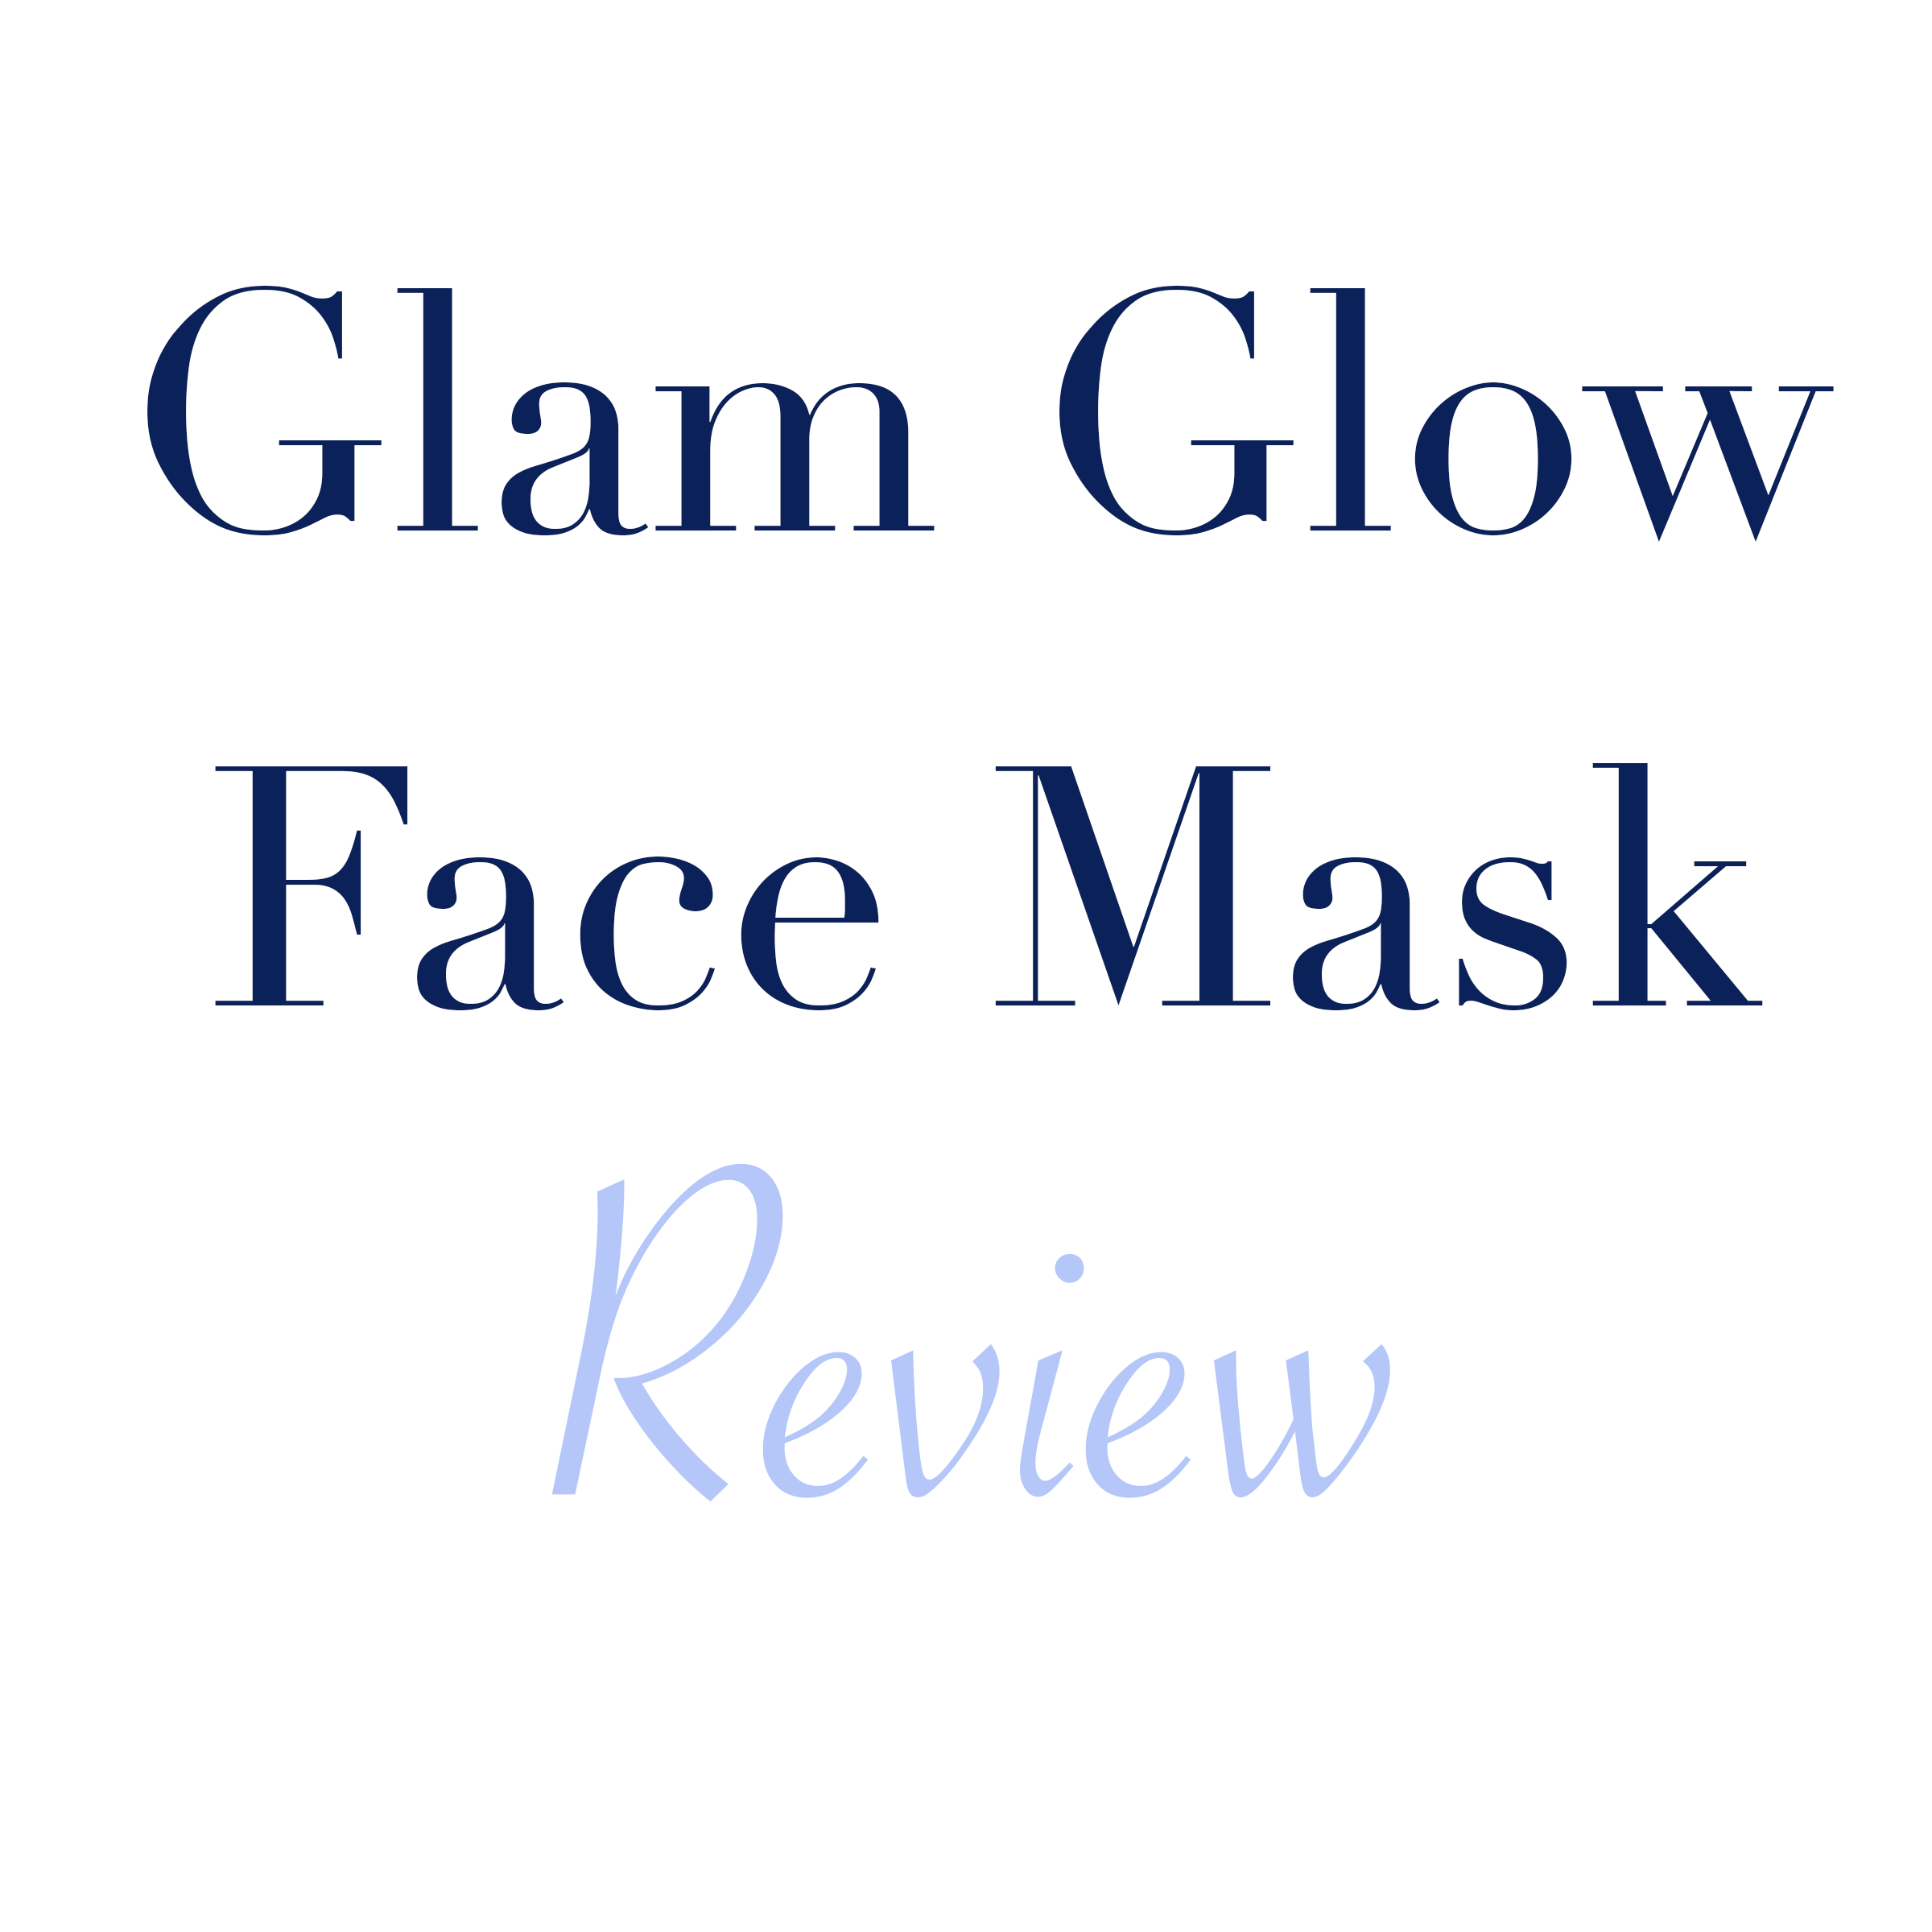 Glam Glow Face Mask Review